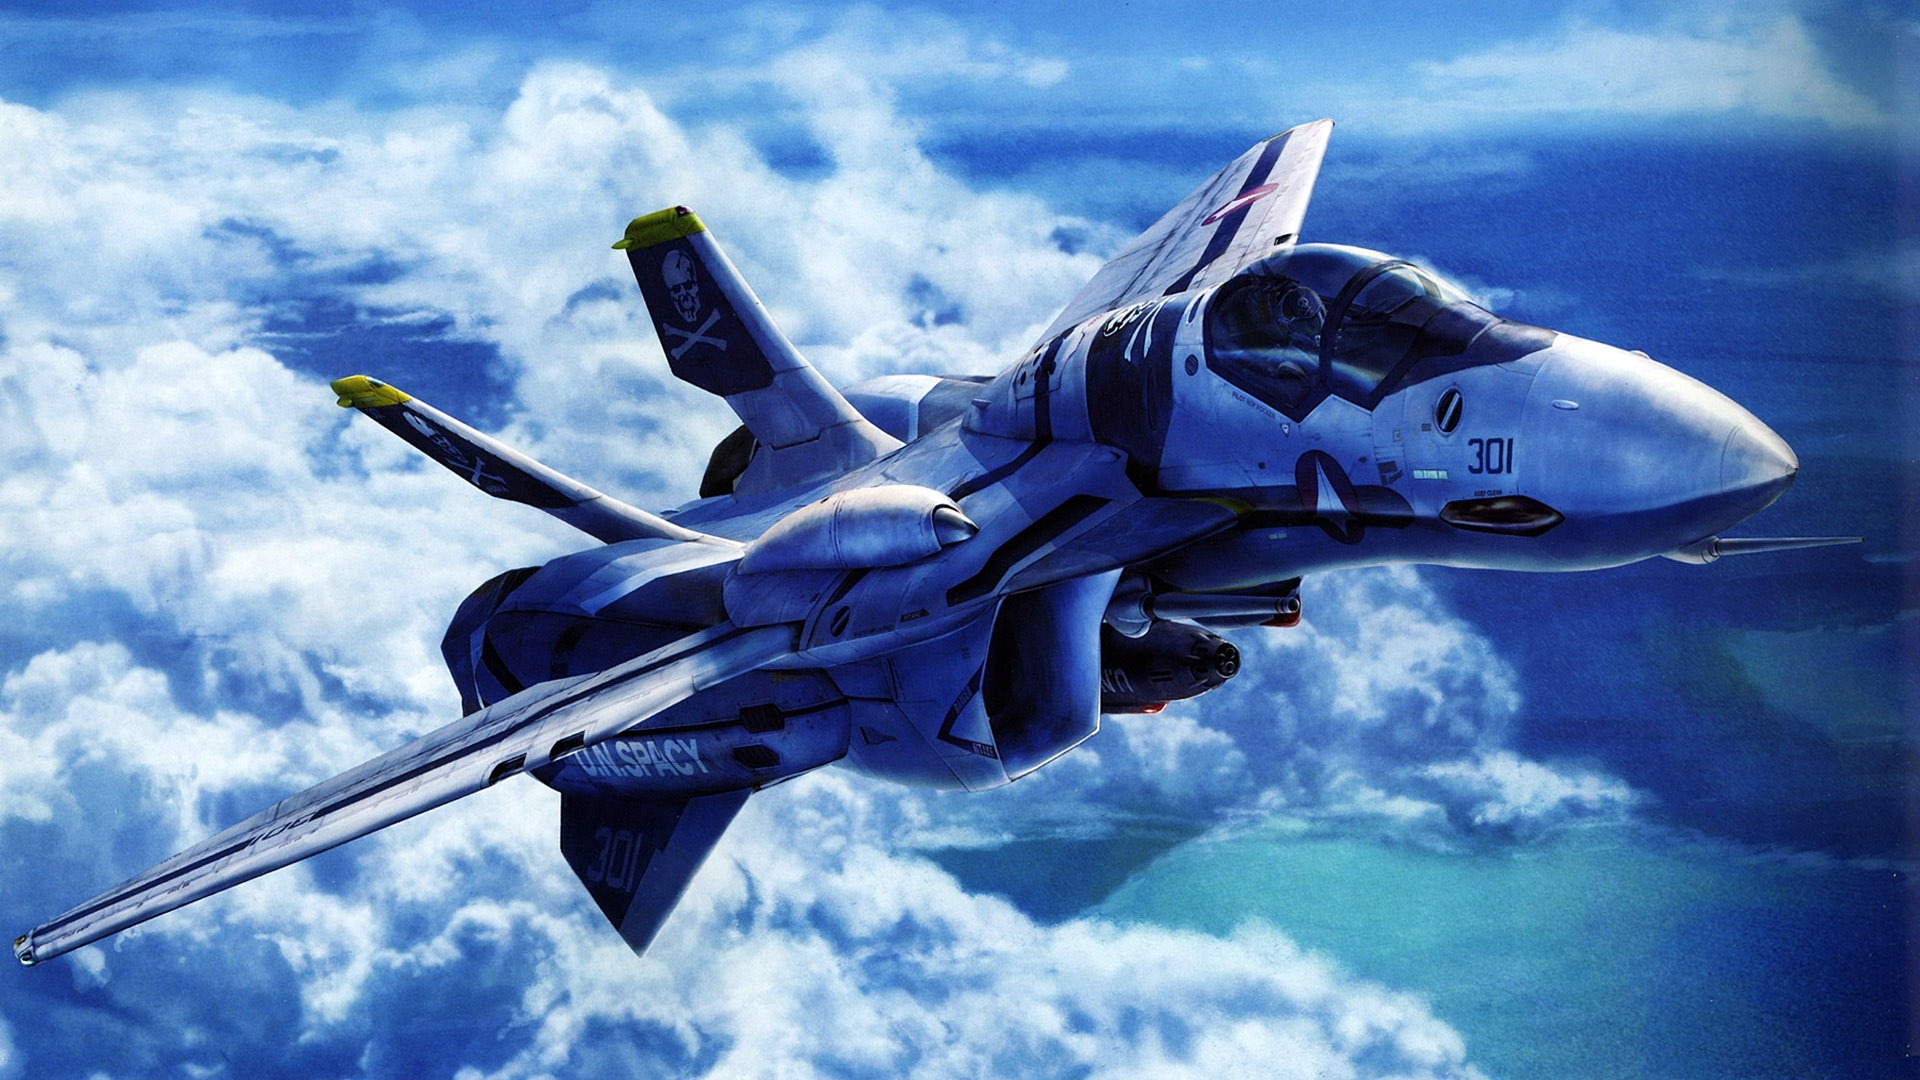 Best fighter airplane wallpapers hd wallpapers55.com - Best